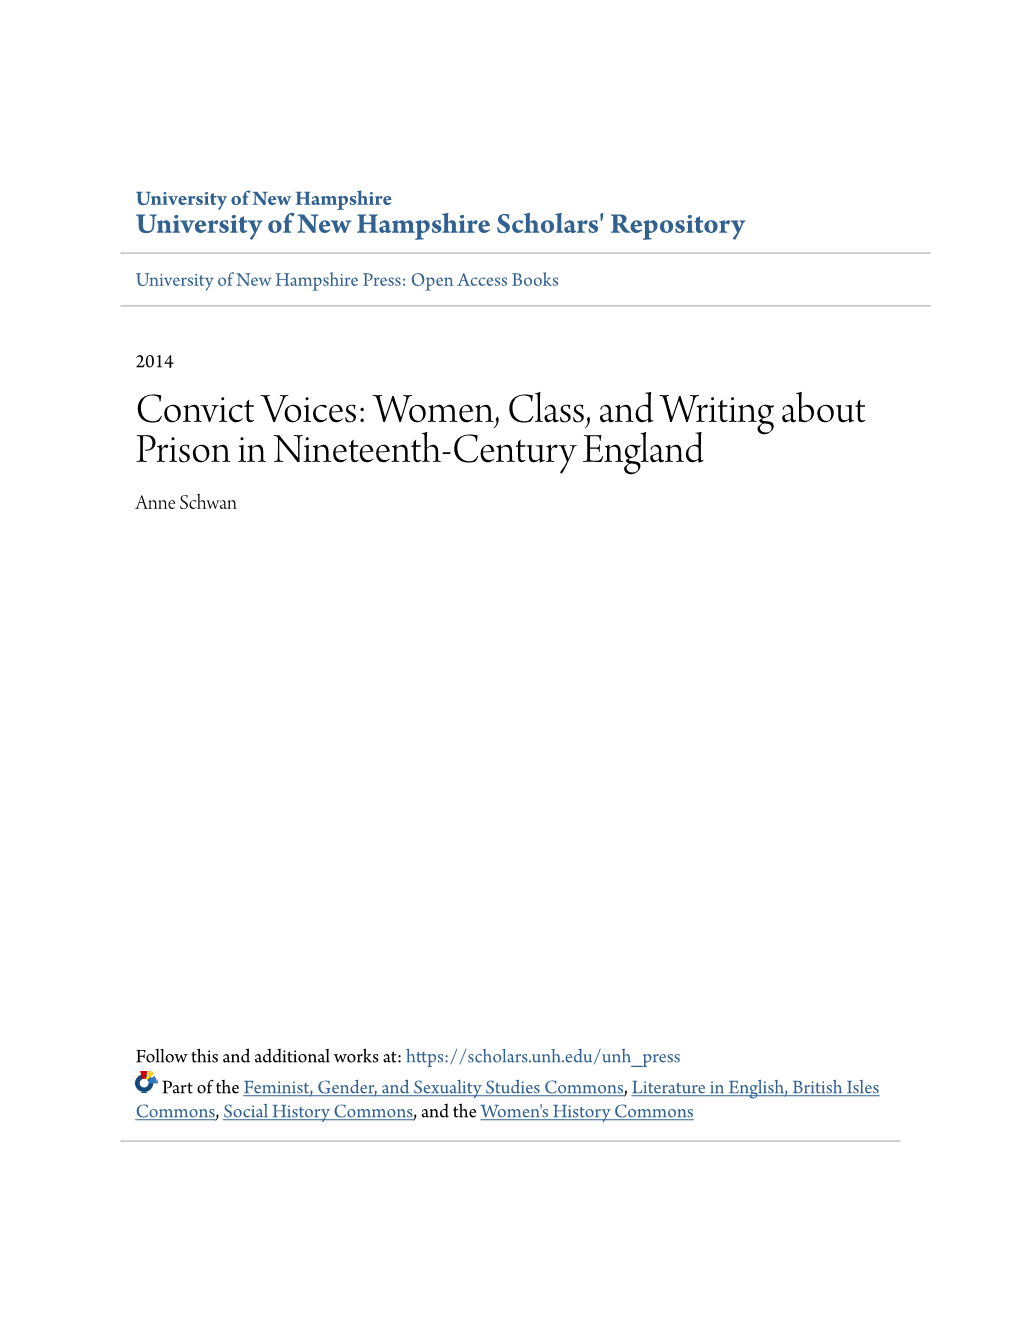 Convict Voices: Women, Class, and Writing About Prison in Nineteenth-Century England Anne Schwan